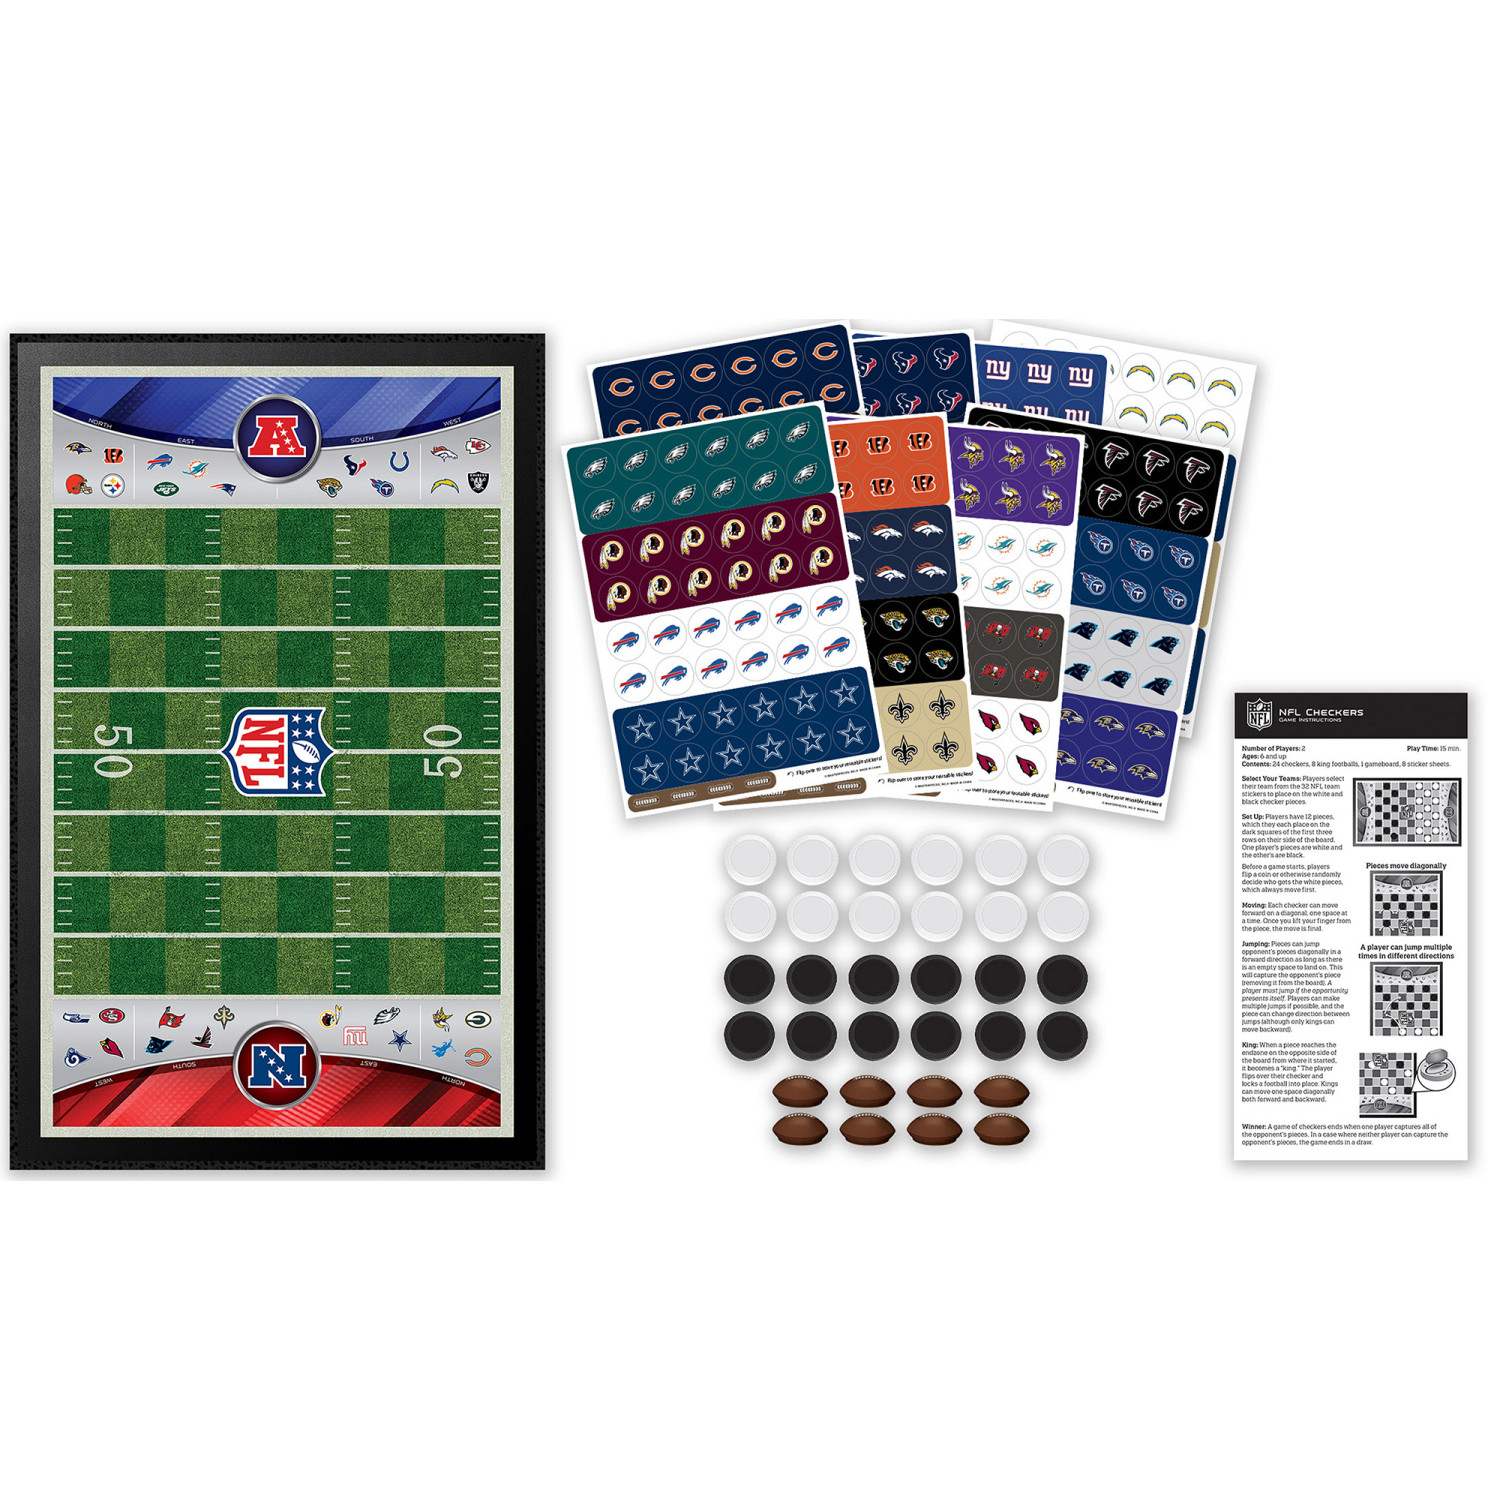 MasterPieces Officially licensed NFL League-NFL Checkers Board Game for Families and Kids ages 6 and Up - image 3 of 5